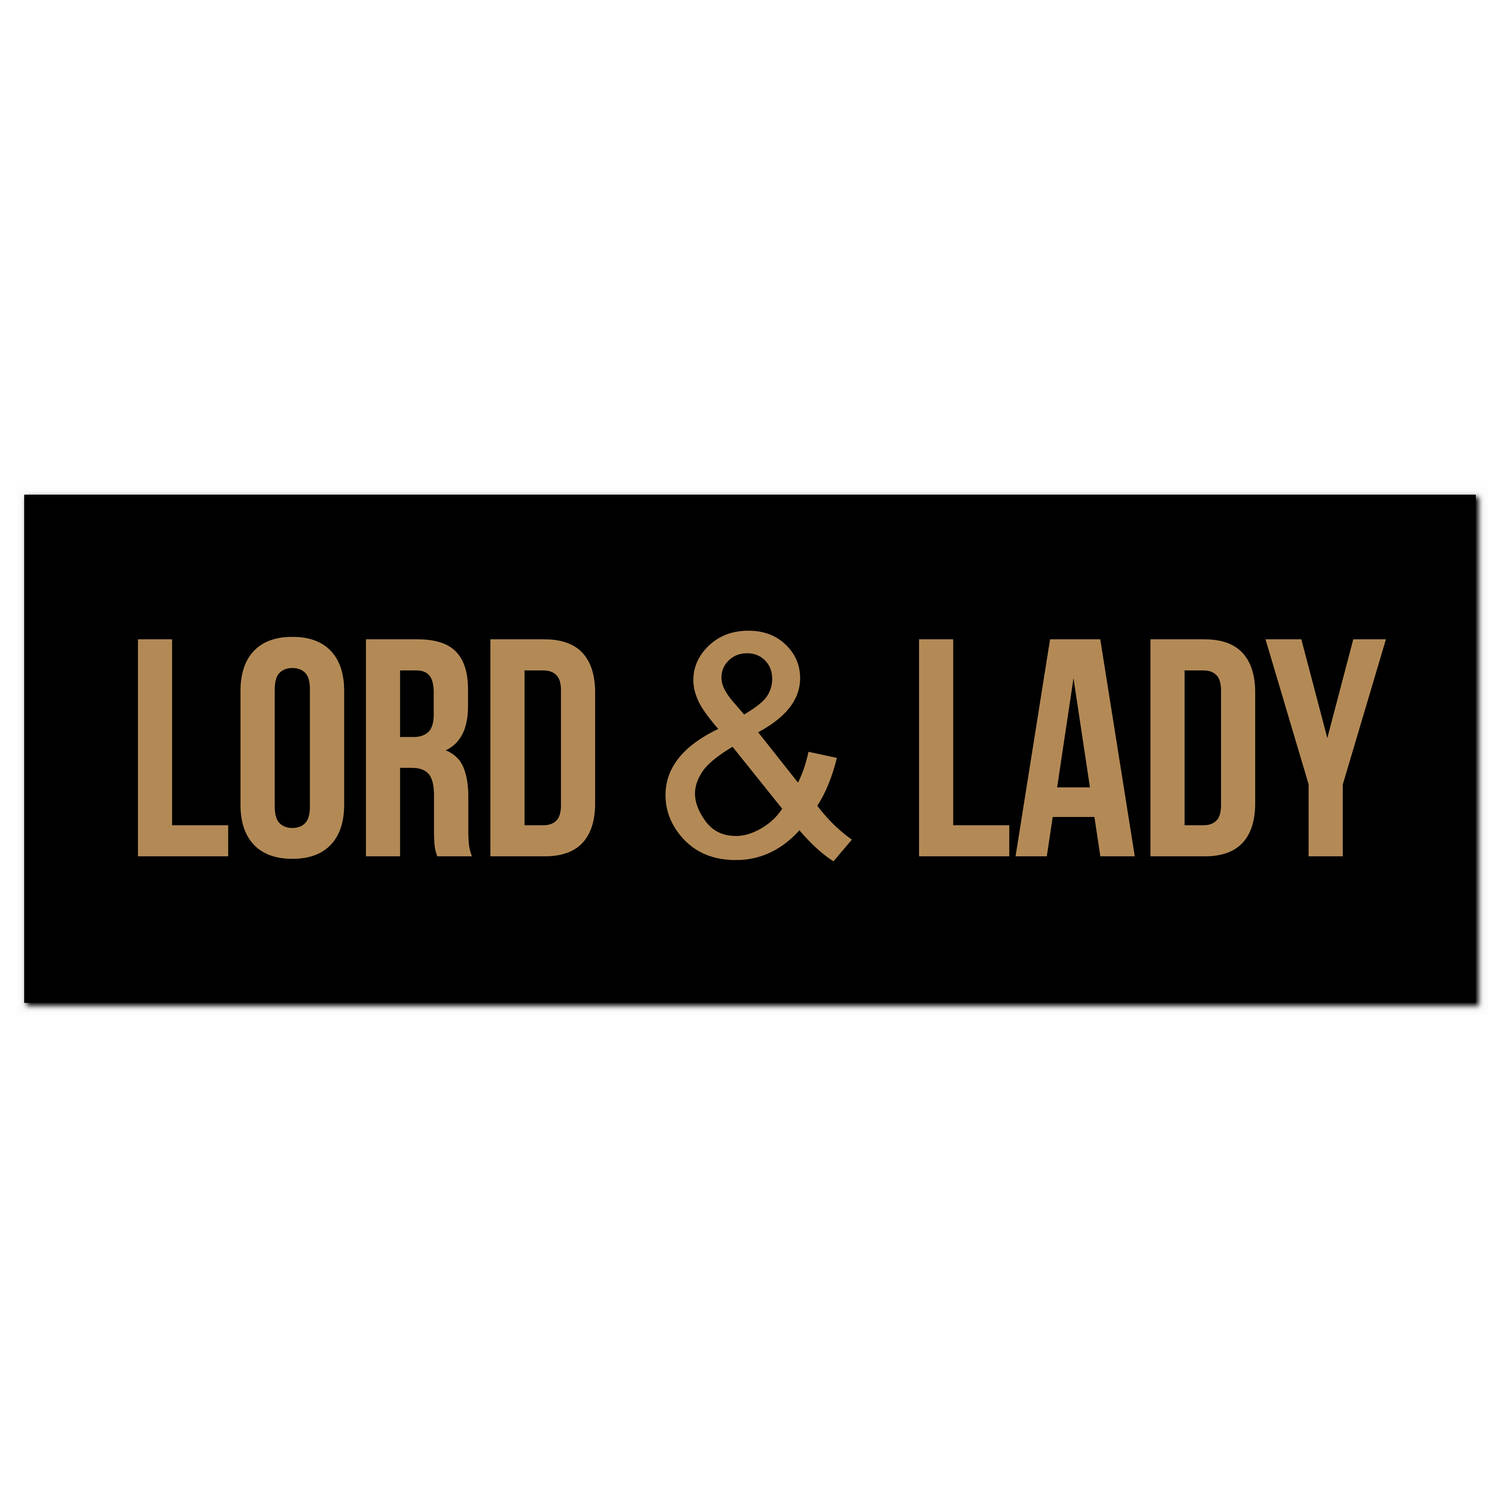 Lord & Lady Gold Foil Plaque - Image 1